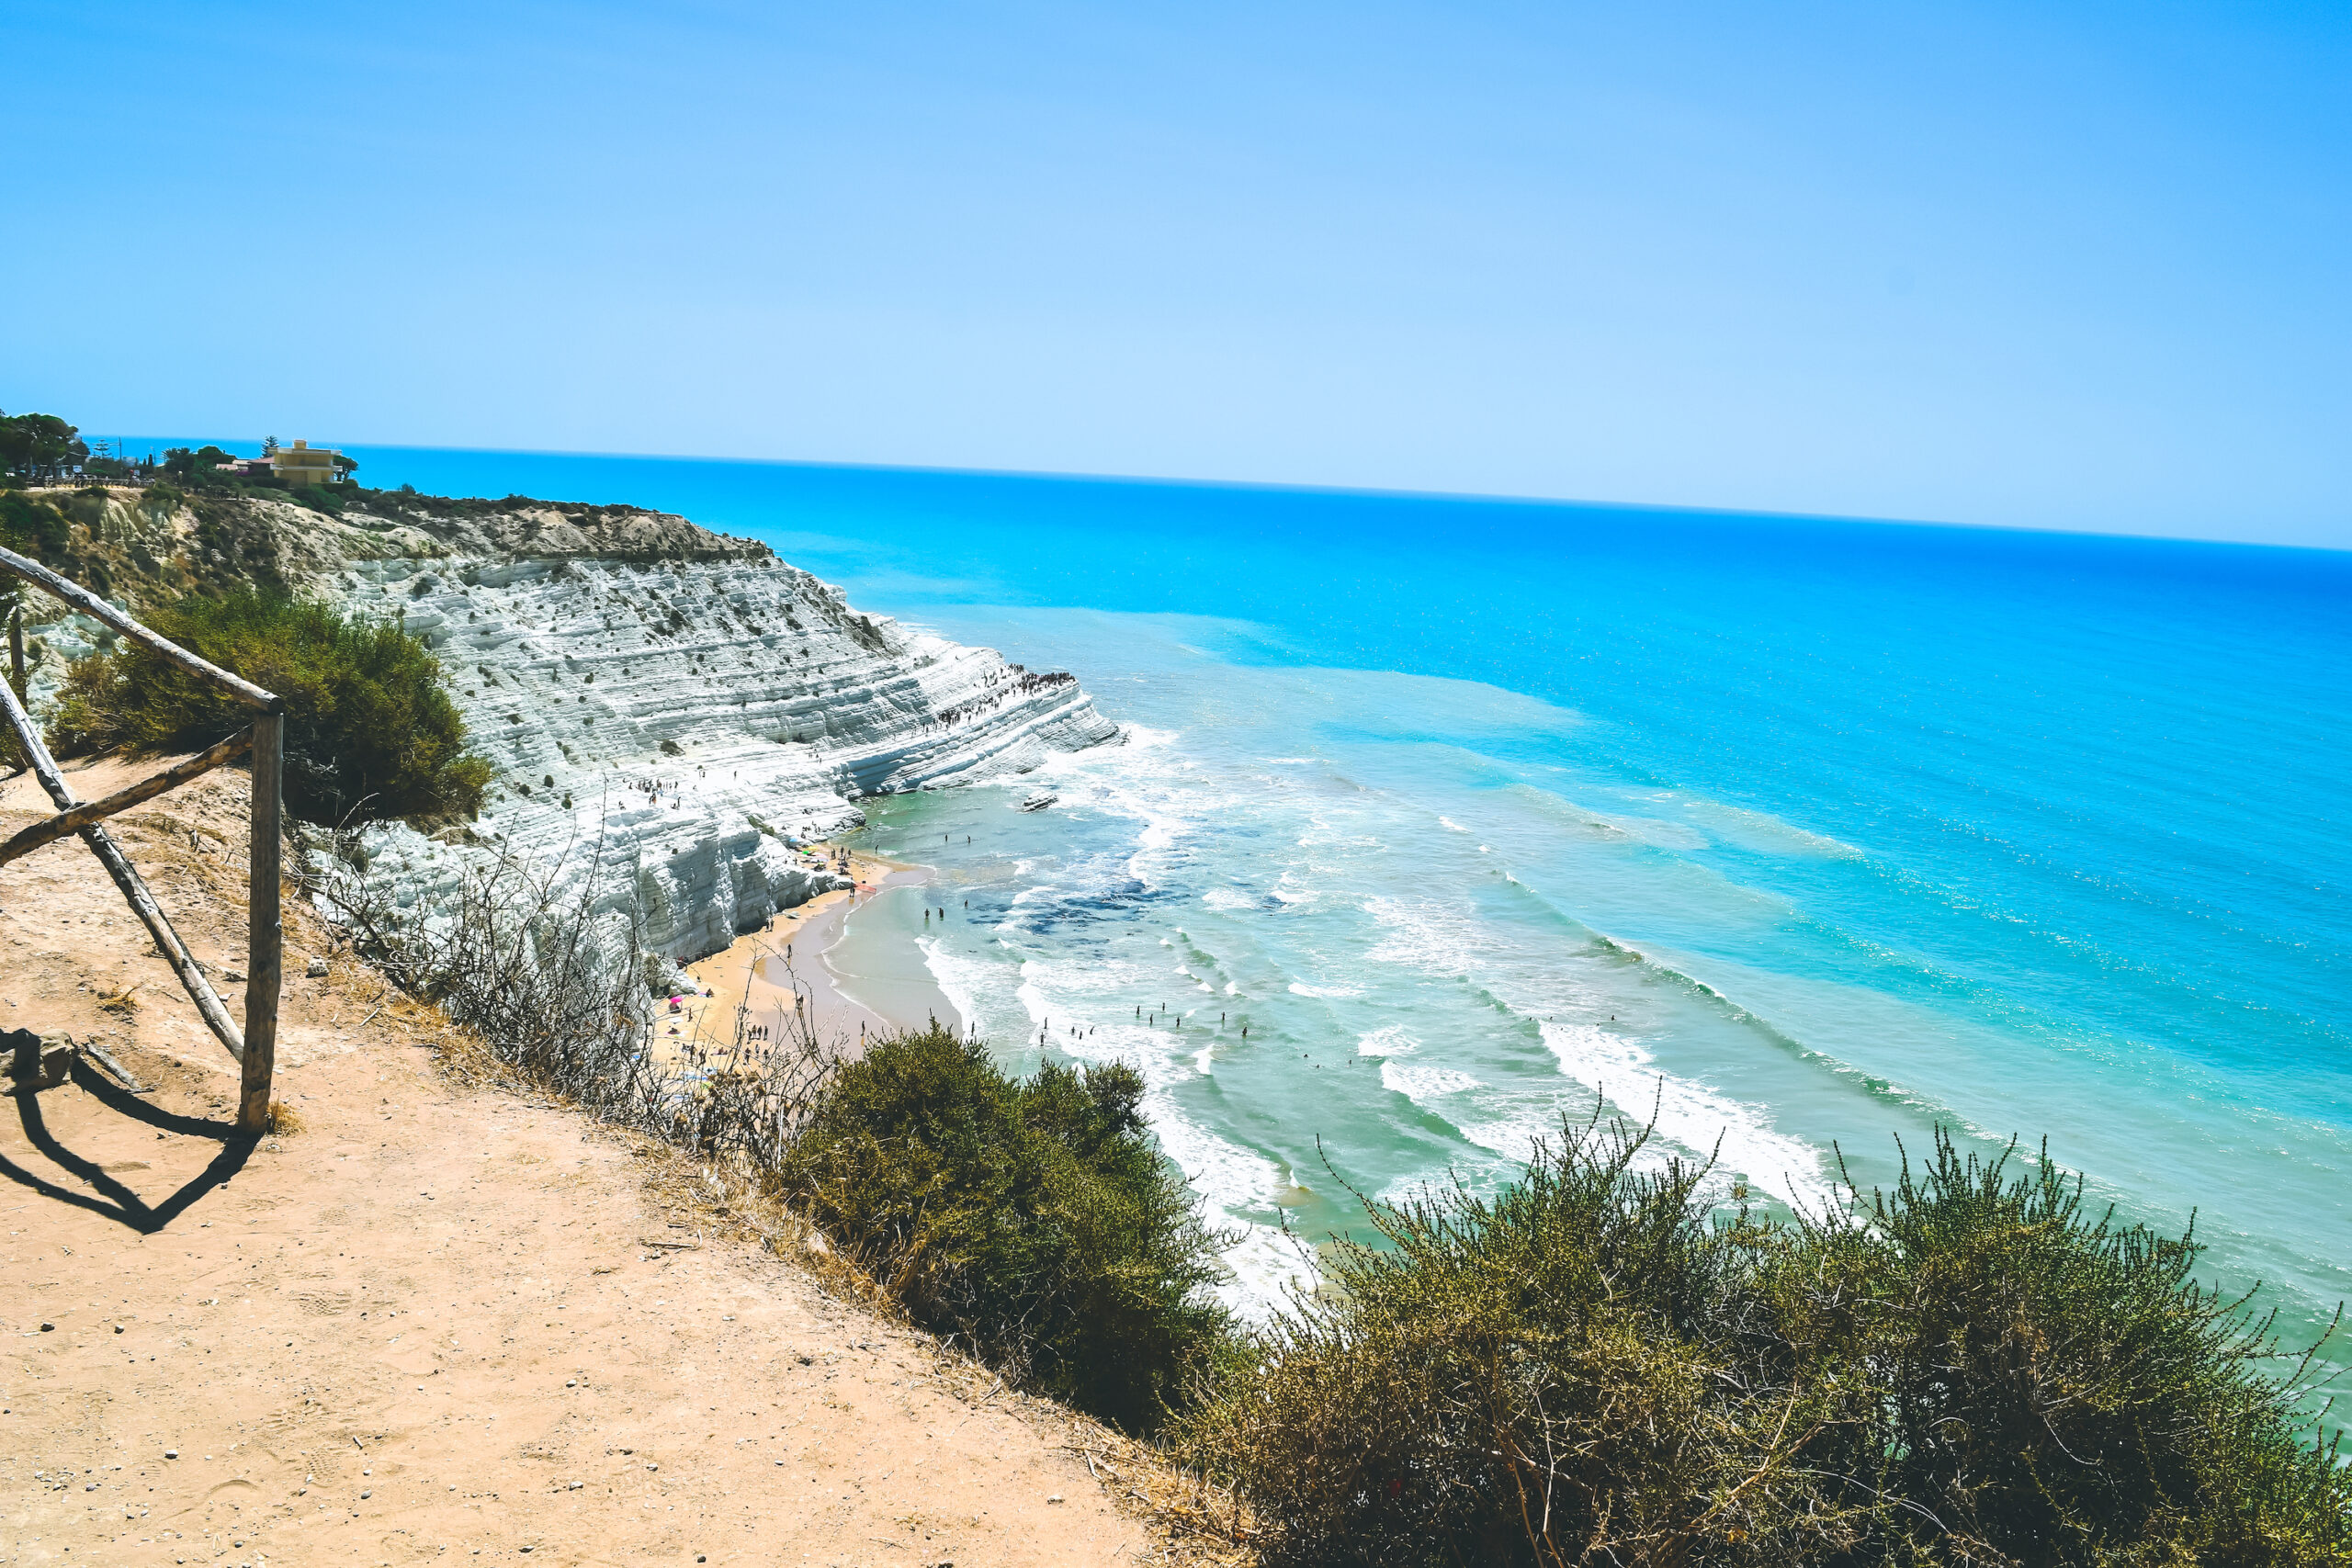 Travel guide to sicily scala dei turchi agrigento what to do see italy best time of year-22